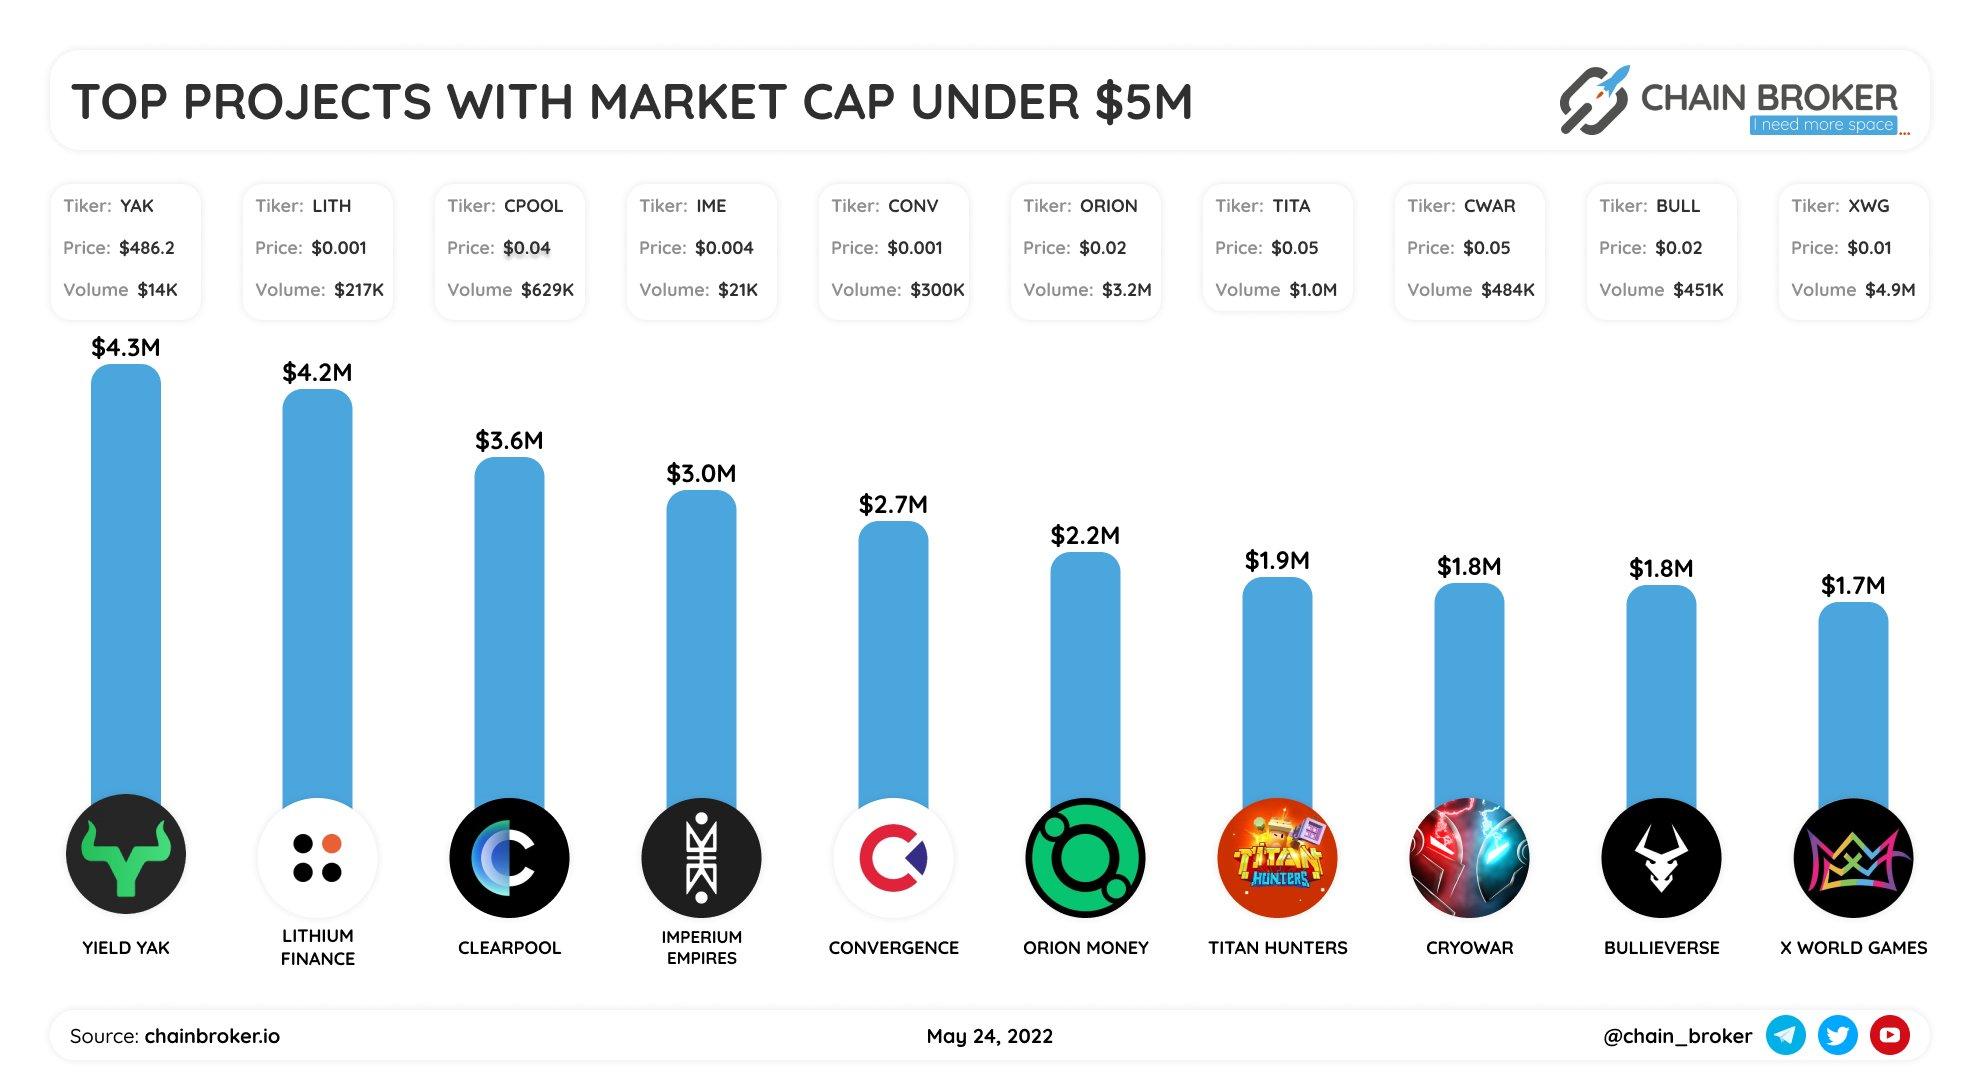 Top projects with Market Cap under $5M